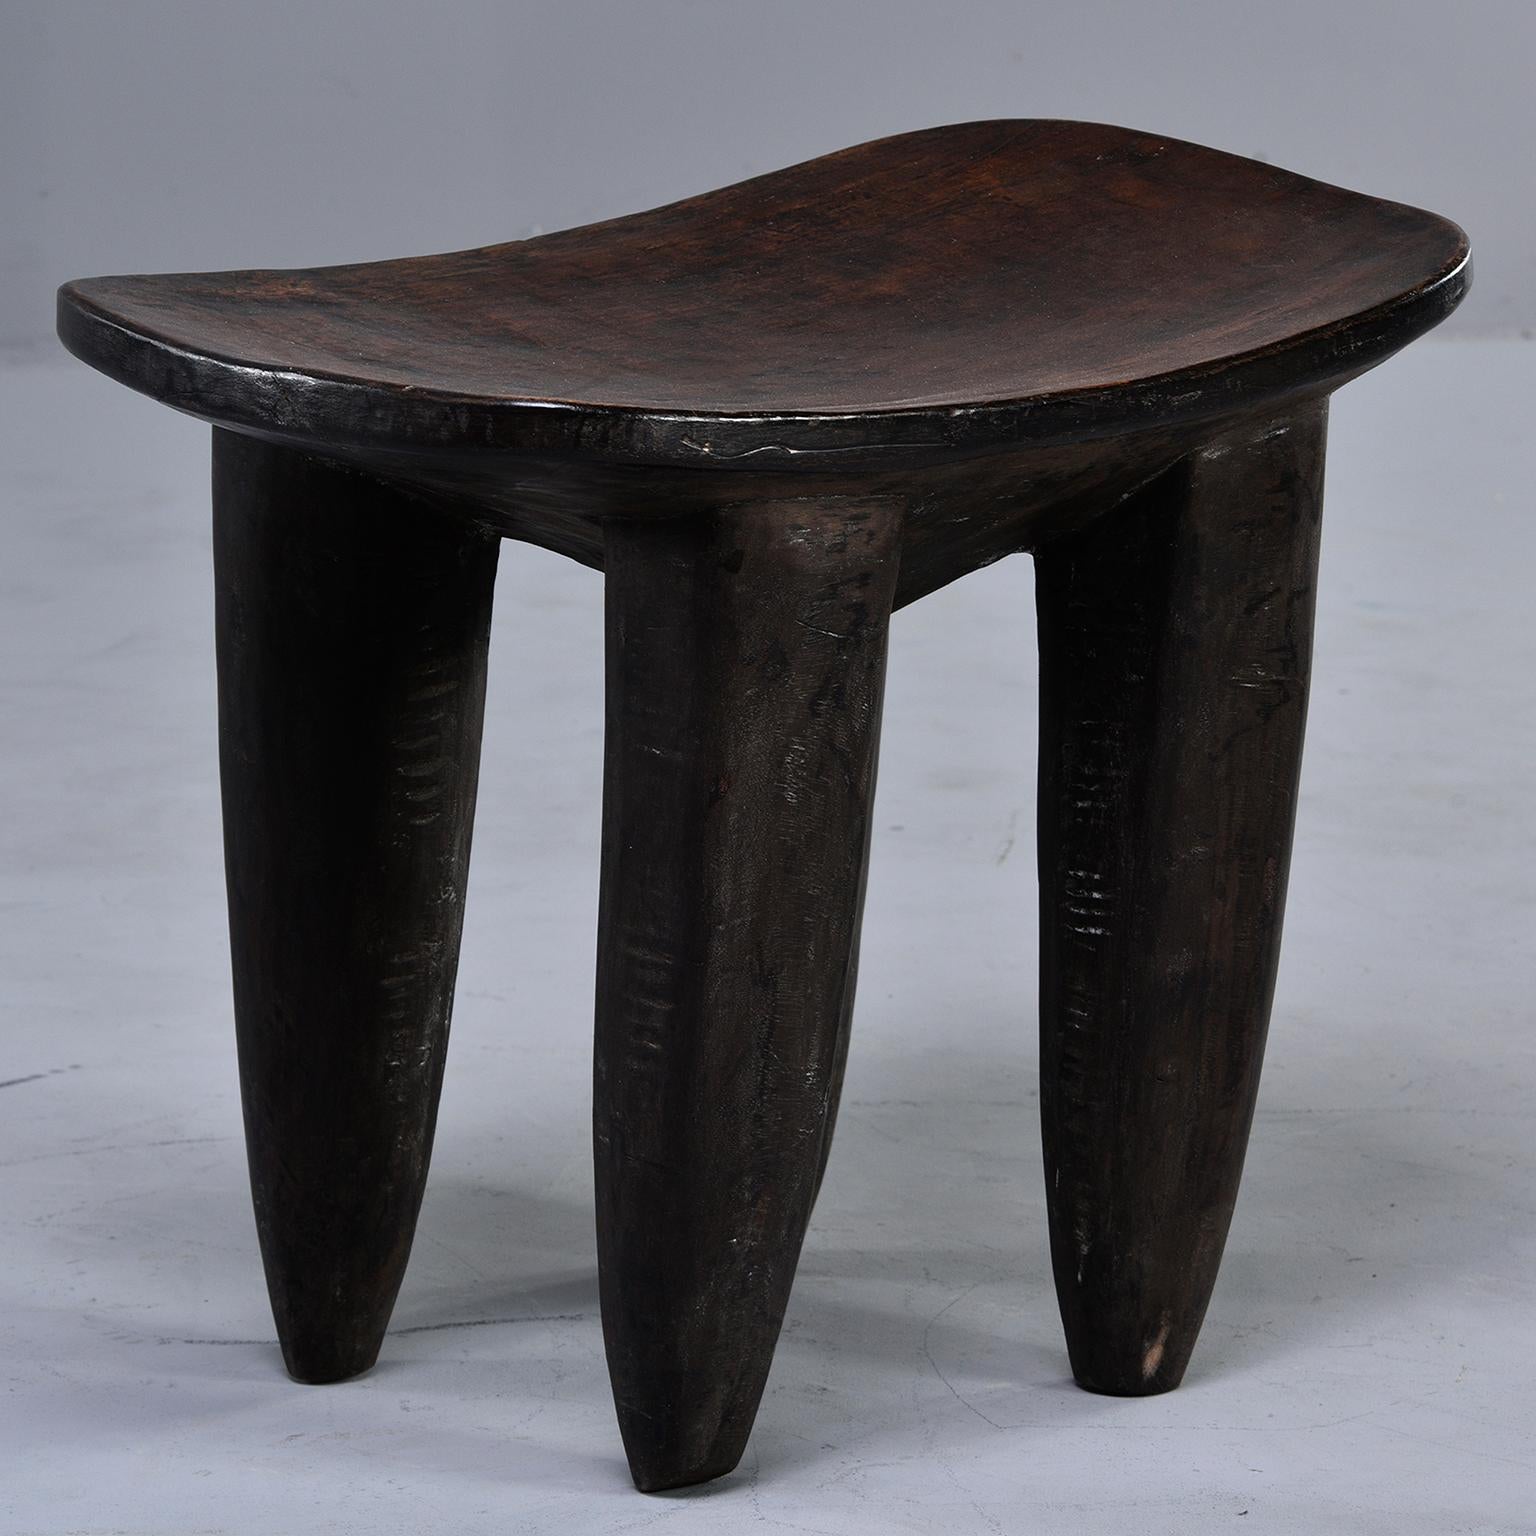 Senufo hand carved stool or side table features dark stained wood with a slightly curved top and thick, tapered legs, circa 1980s. The Senufo people are from Africa’s Ivory Coast.